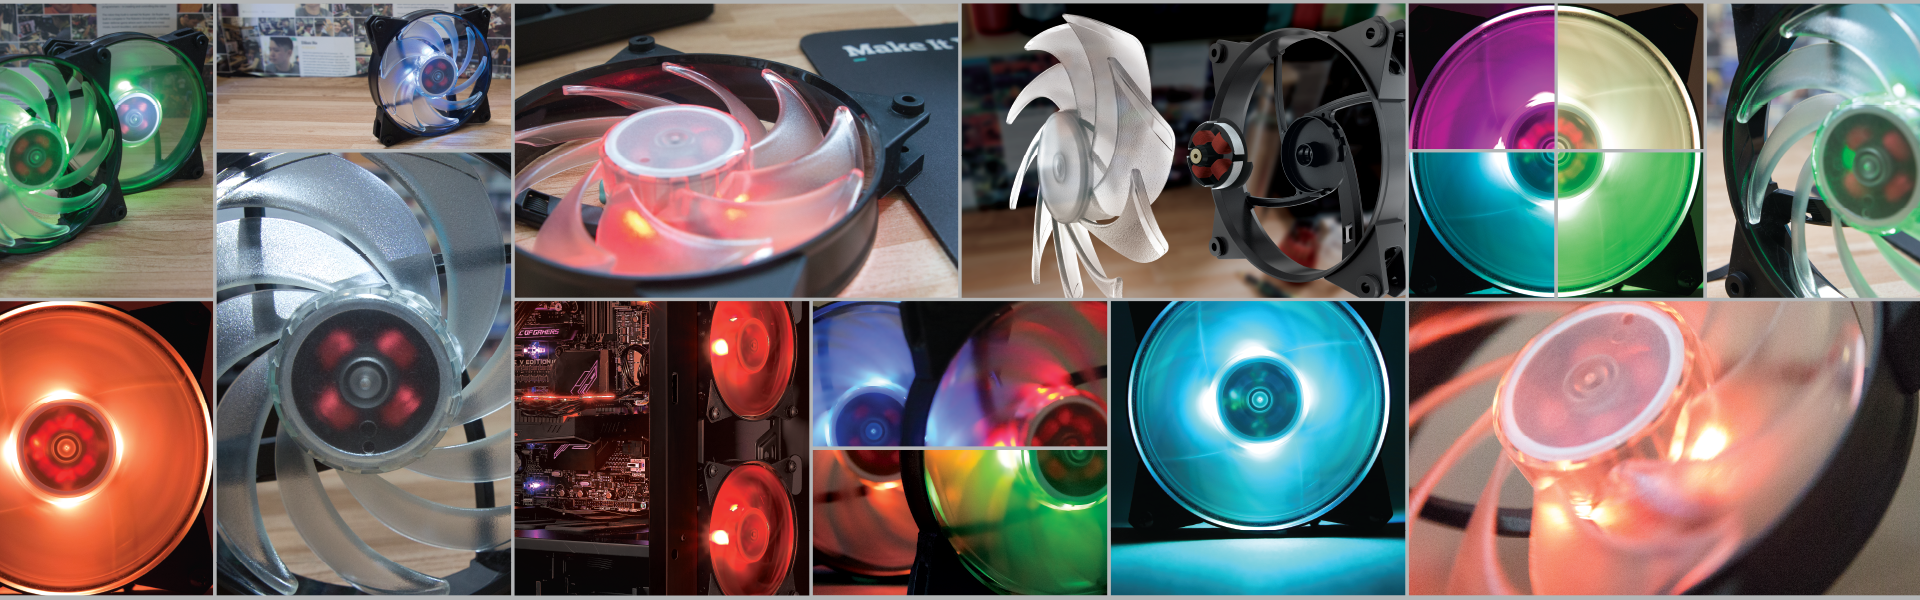 https://assets.coolermaster.com/products/masterfan-pro-120-ab-rgb-3in1-with-controller/img/web_mf_p120_ab_rgb_07_bg.png